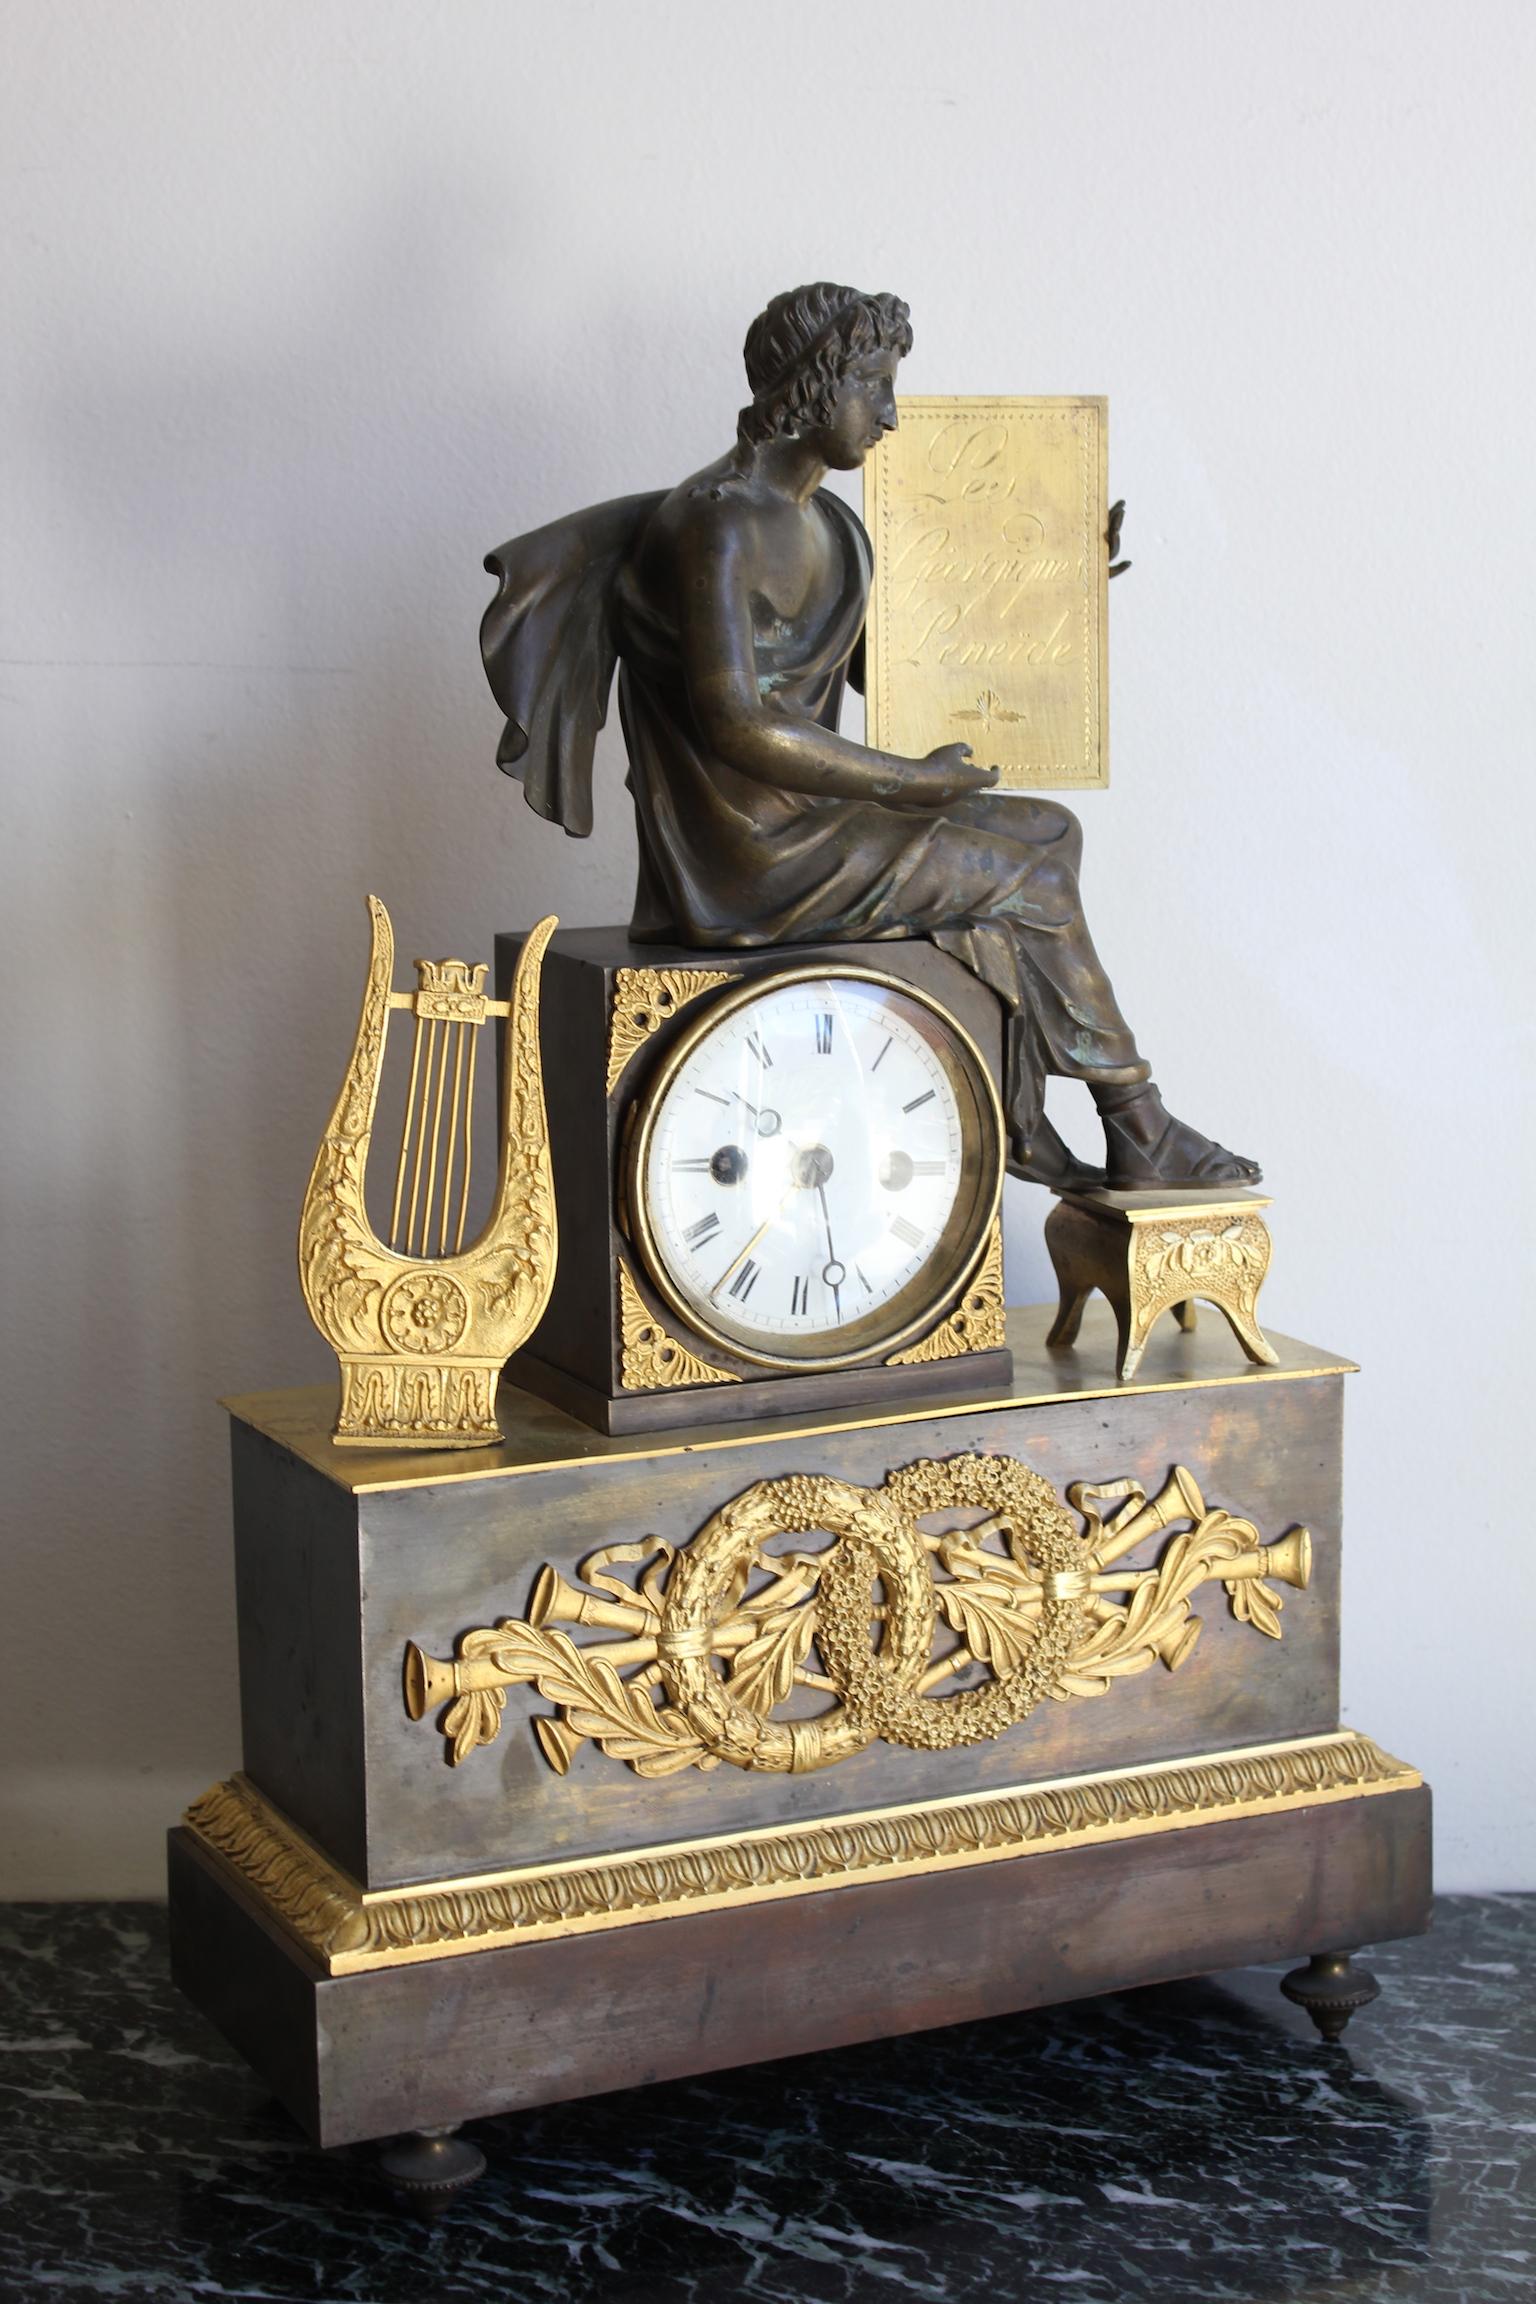 Empire period clock in gilded bronze. Good condition. Empire movement with Pendulum and bell integrated, in working order. To adjust.
Dimensions: Width 28.5cm, height 42.5cm, depth 11cm.